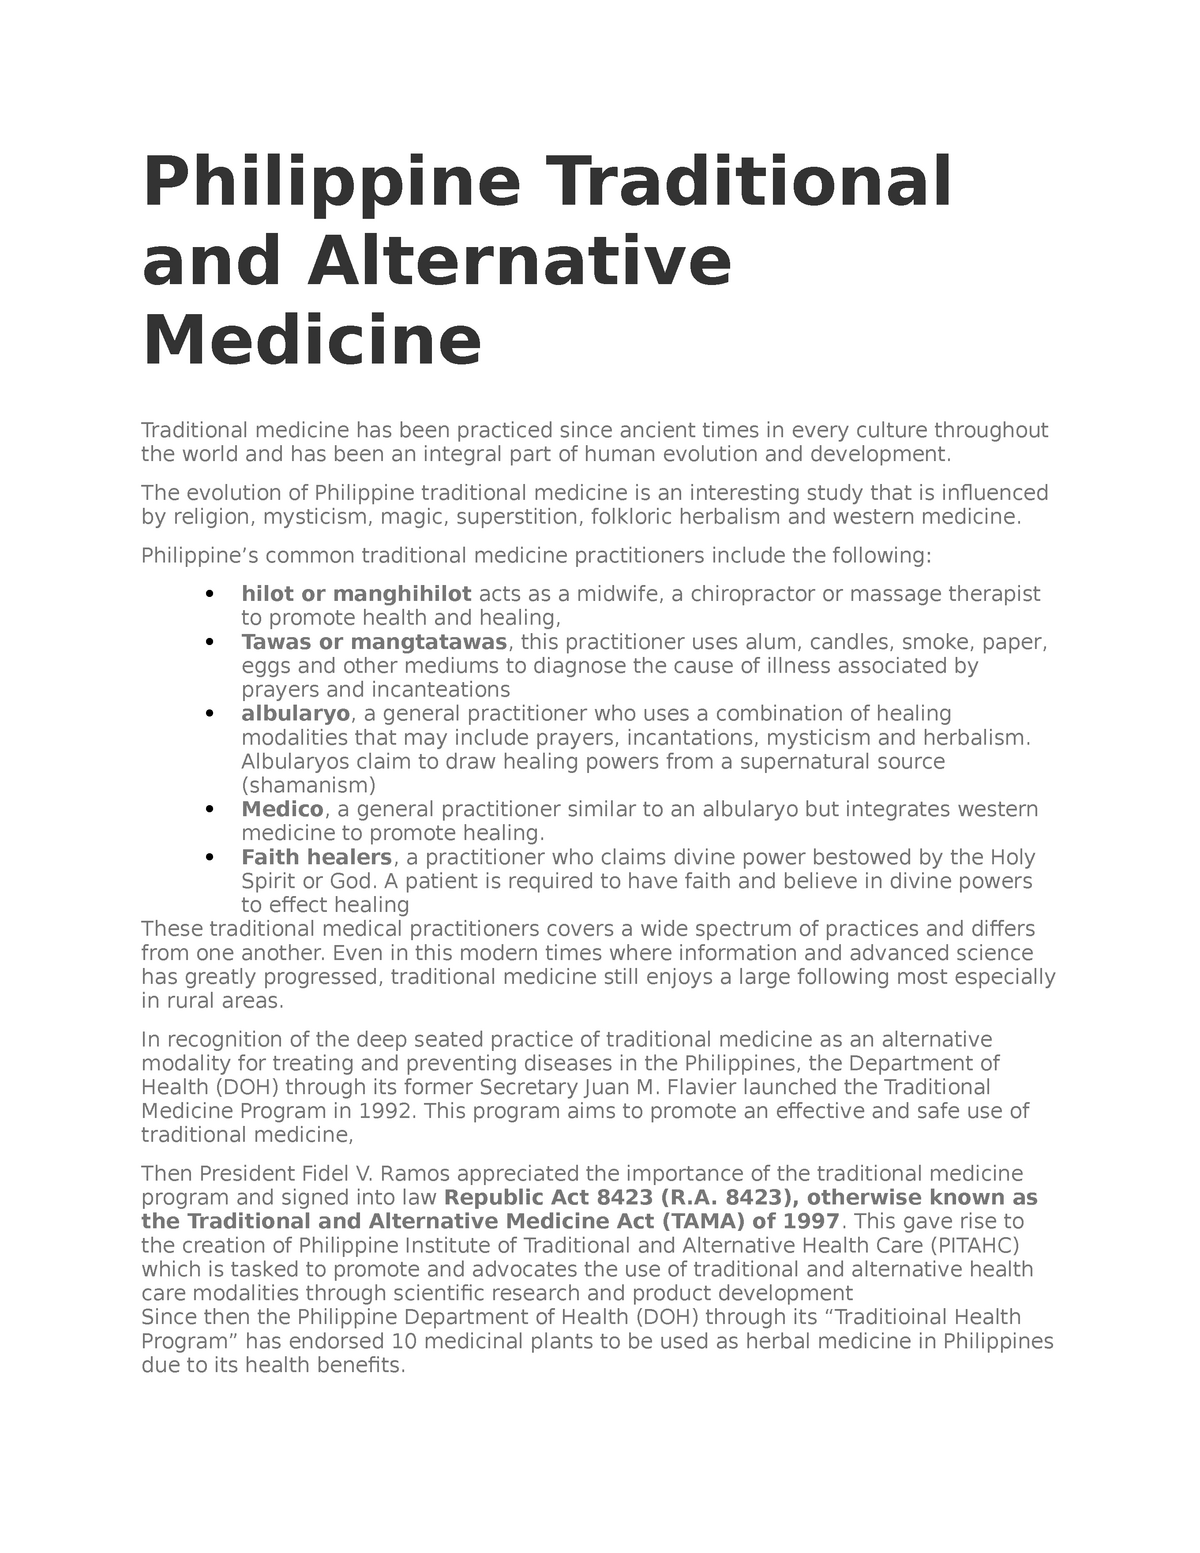 essay about traditional and alternative medicine